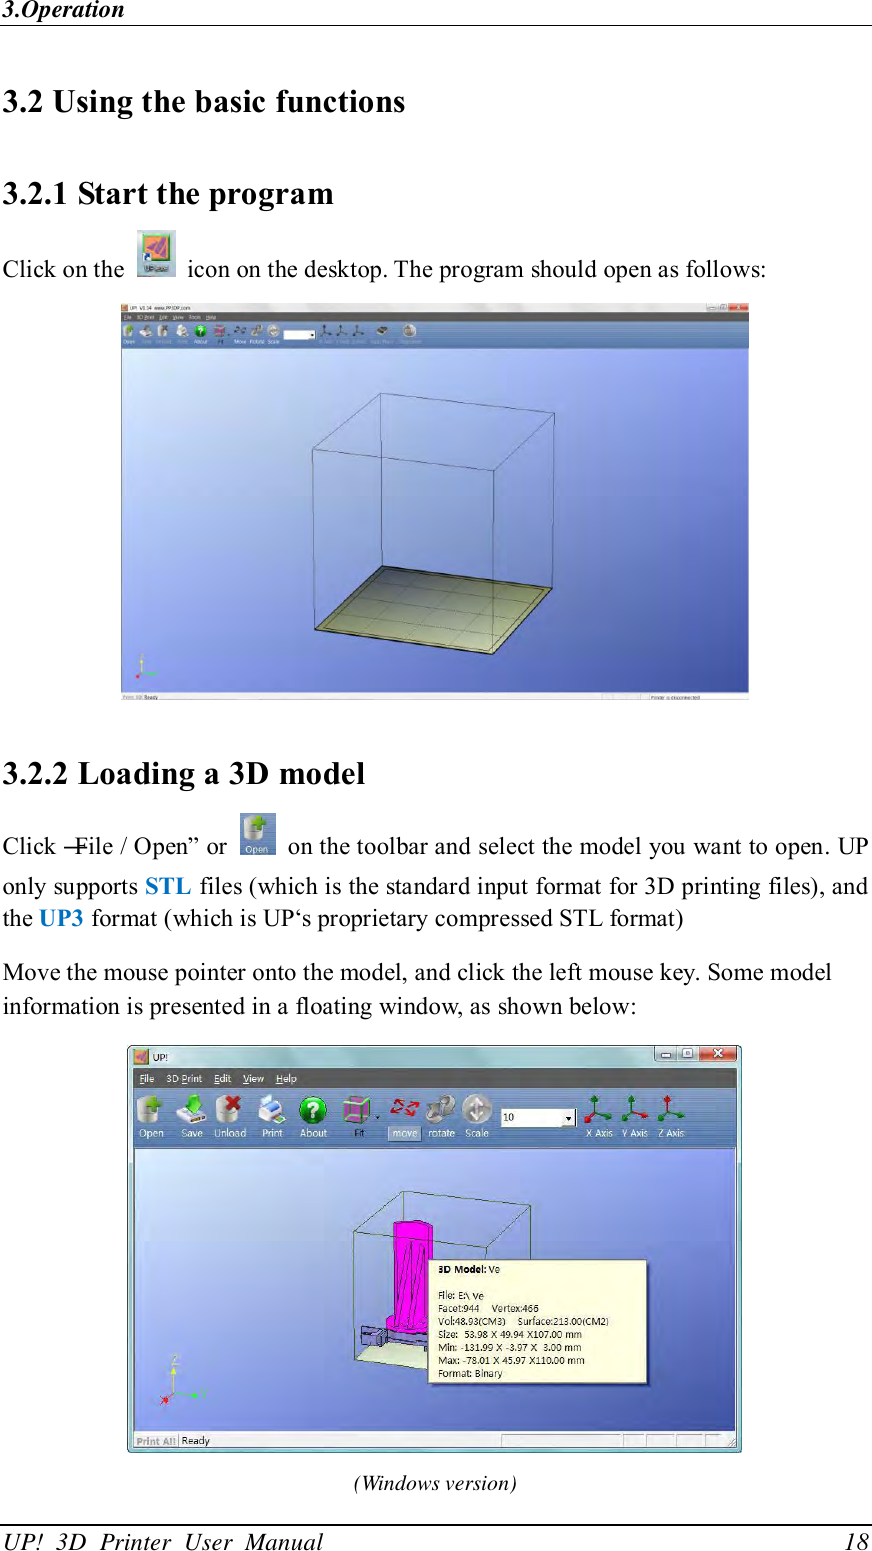 3.Operation UP!  3D  Printer  User  Manual                                18 3.2 Using the basic functions 3.2.1 Start the program Click on the    icon on the desktop. The program should open as follows:  3.2.2 Loading a 3D model Click ―File / Open‖ or    on the toolbar and select the model you want to open. UP only supports STL files (which is the standard input format for 3D printing files), and the UP3 format (which is UP‘s proprietary compressed STL format) Move the mouse pointer onto the model, and click the left mouse key. Some model information is presented in a floating window, as shown below:  (Windows version) 